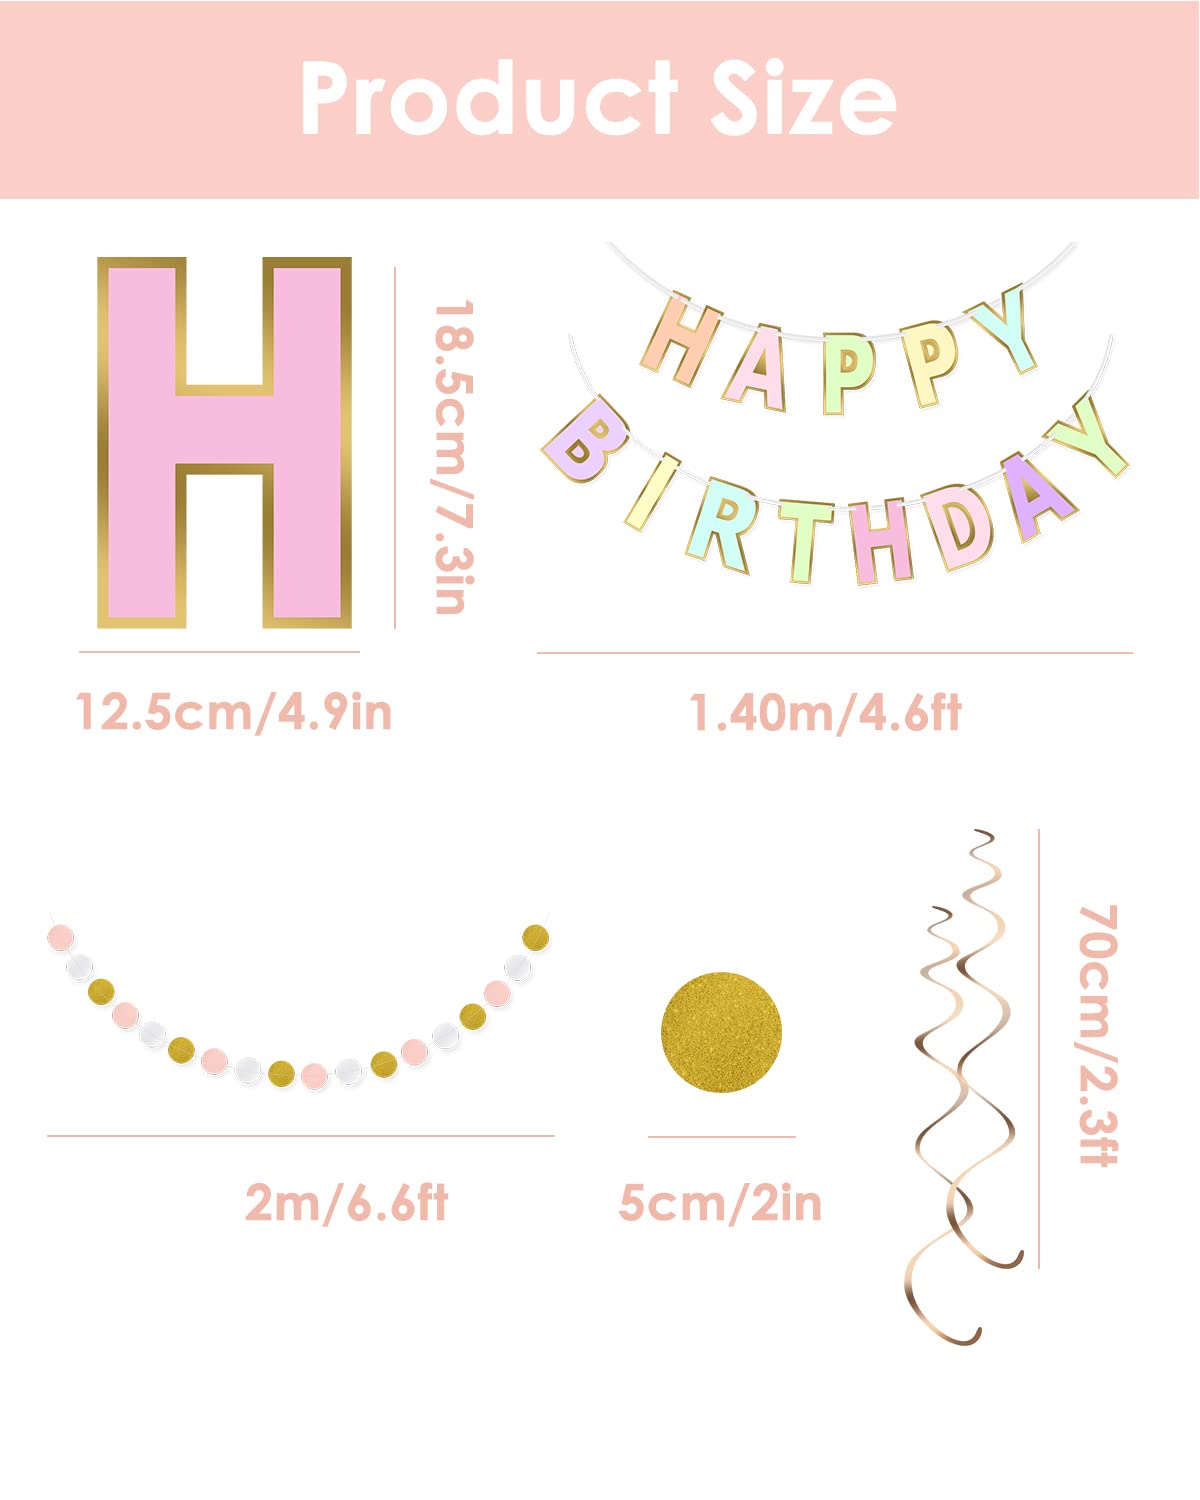 Happy Birthday Banner, Pastel Birthday Decorations, Pack of 20 include Birthday Banner, Garland, 18 Swirls with 3 Colors, Pastel Rainbow Party Decorations for Girls and Women